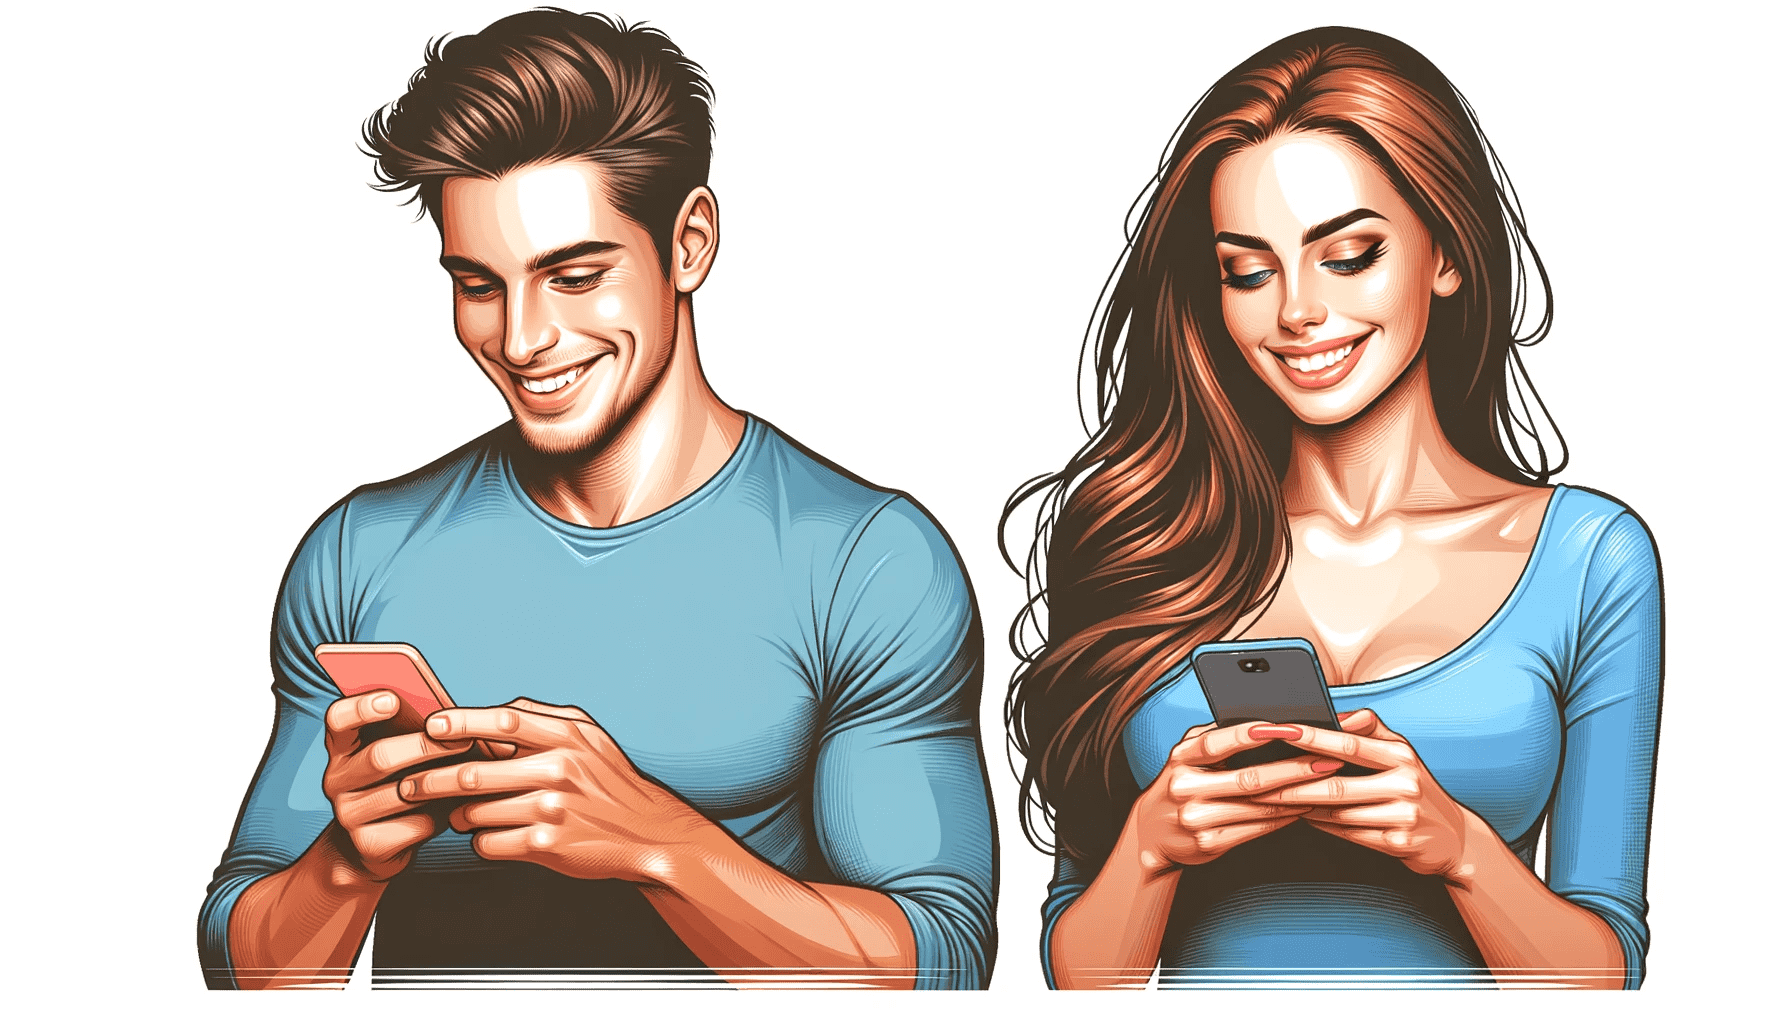 flirting games to play over text